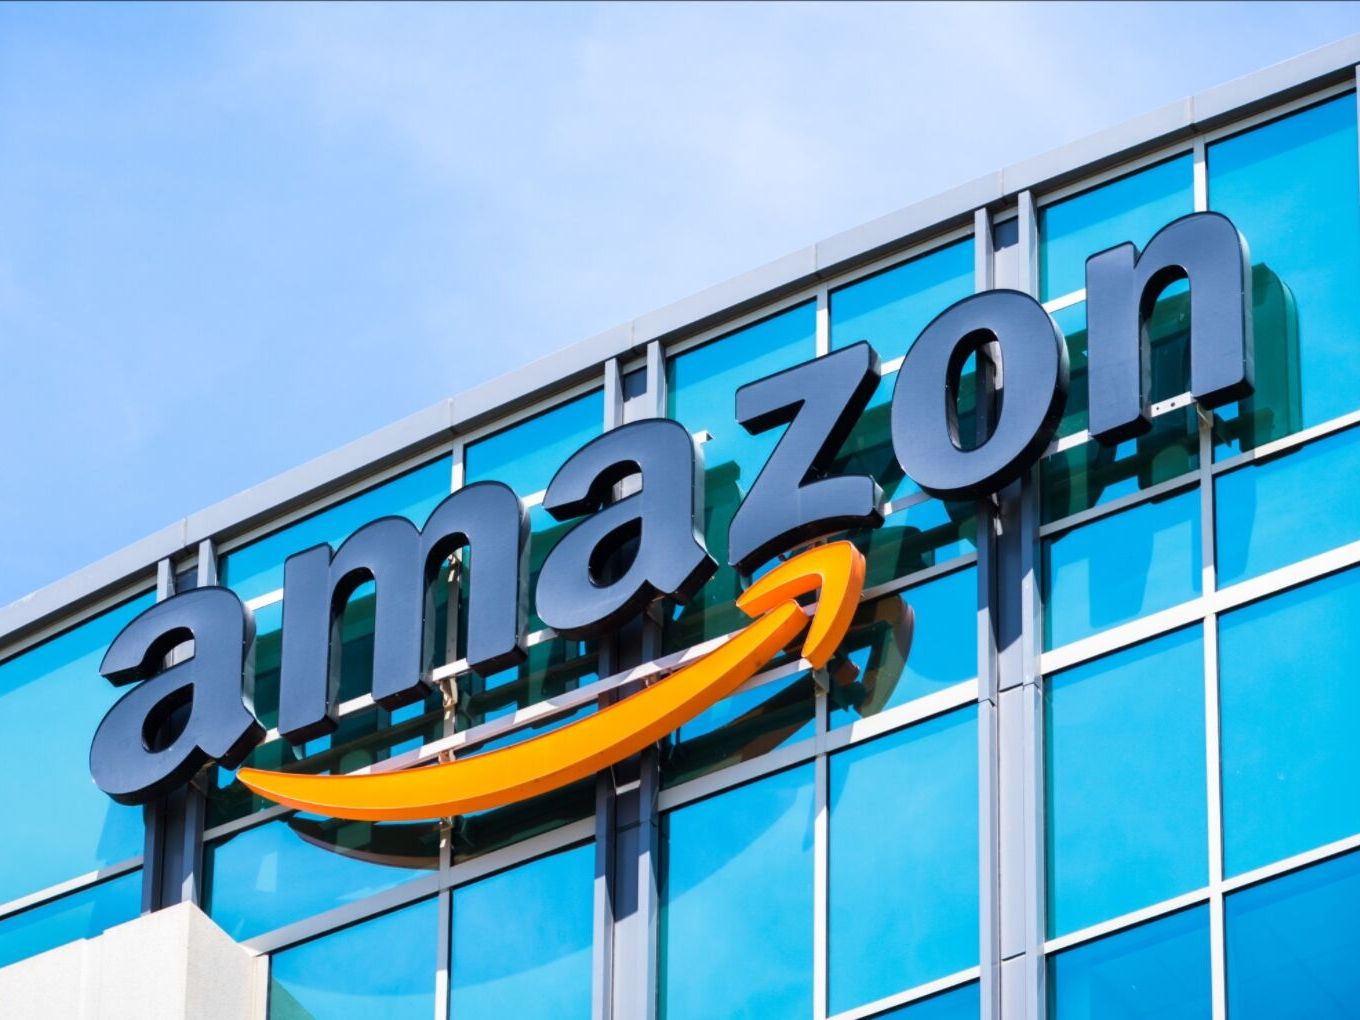 cci-approves-acquisition-by-amazon-com-in-future-coupons